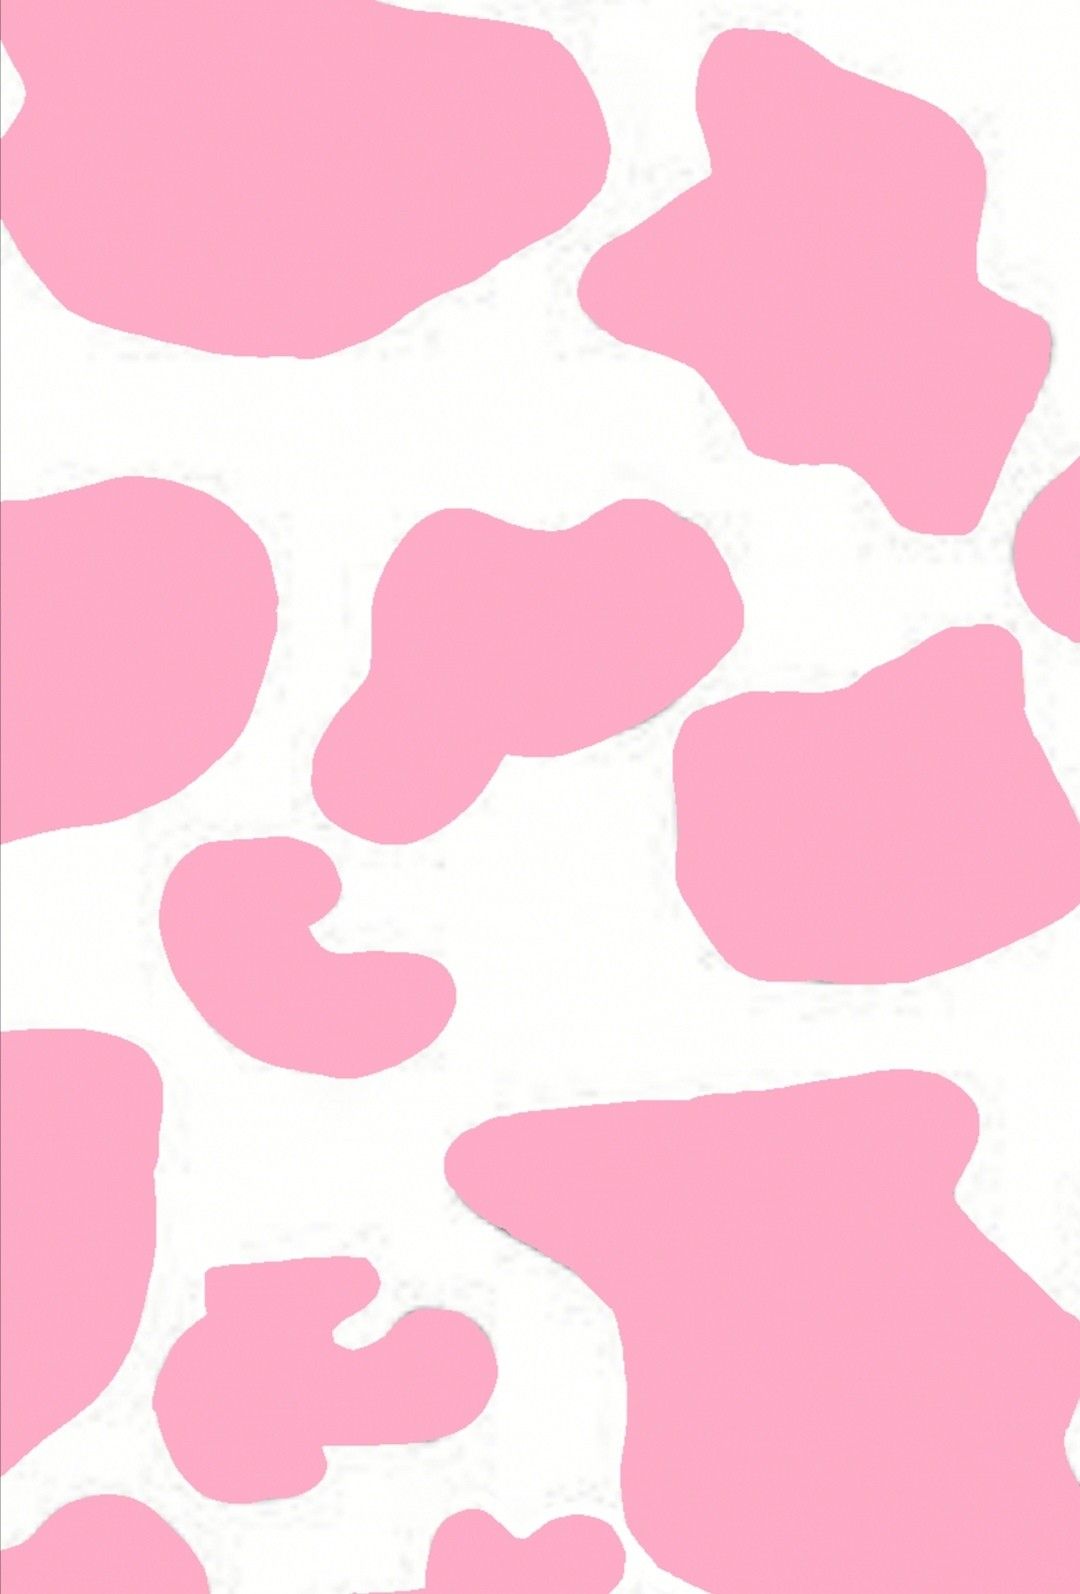 Wallpapers Maker :) on Strawberry Cow Print Wallpapers in 2020